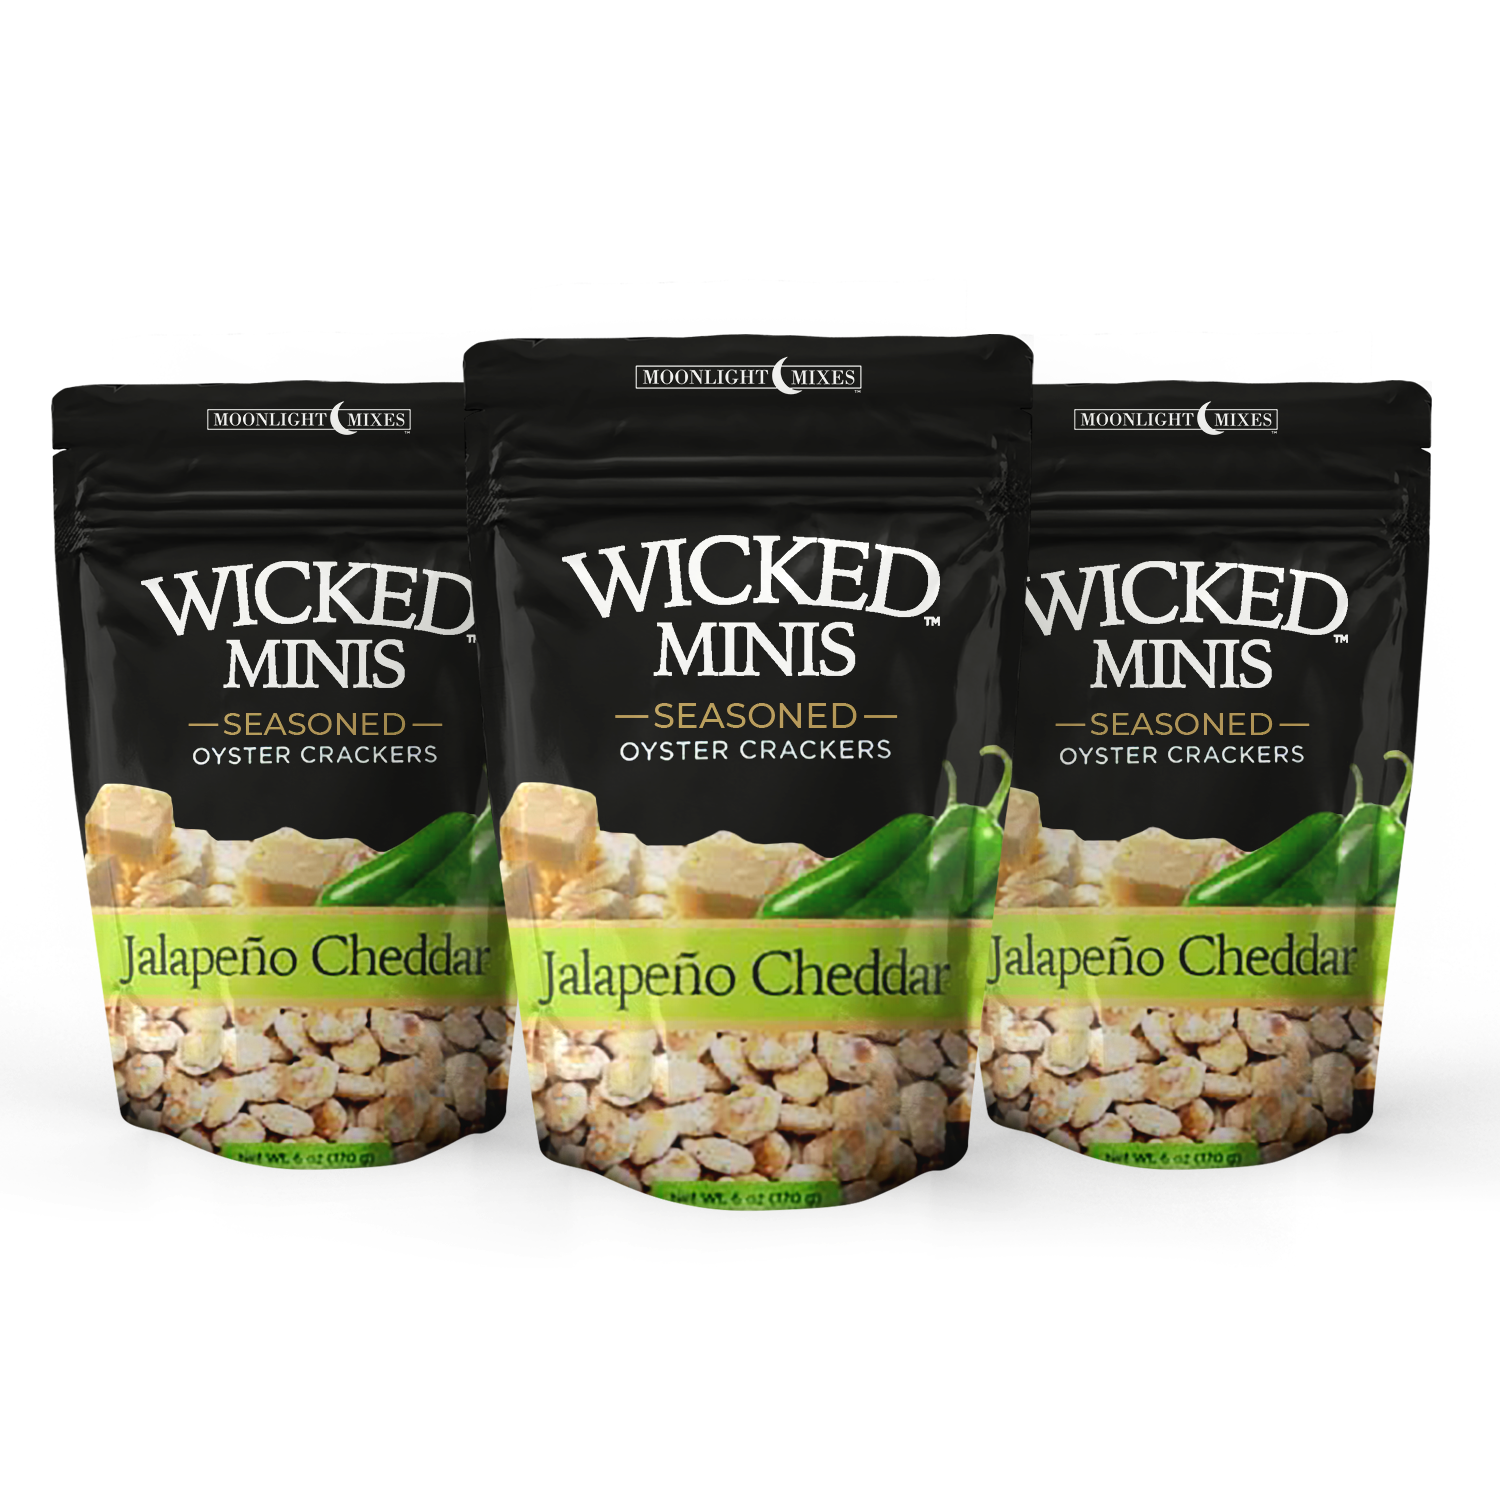 Wicked Minis Jalapeno Cheddar